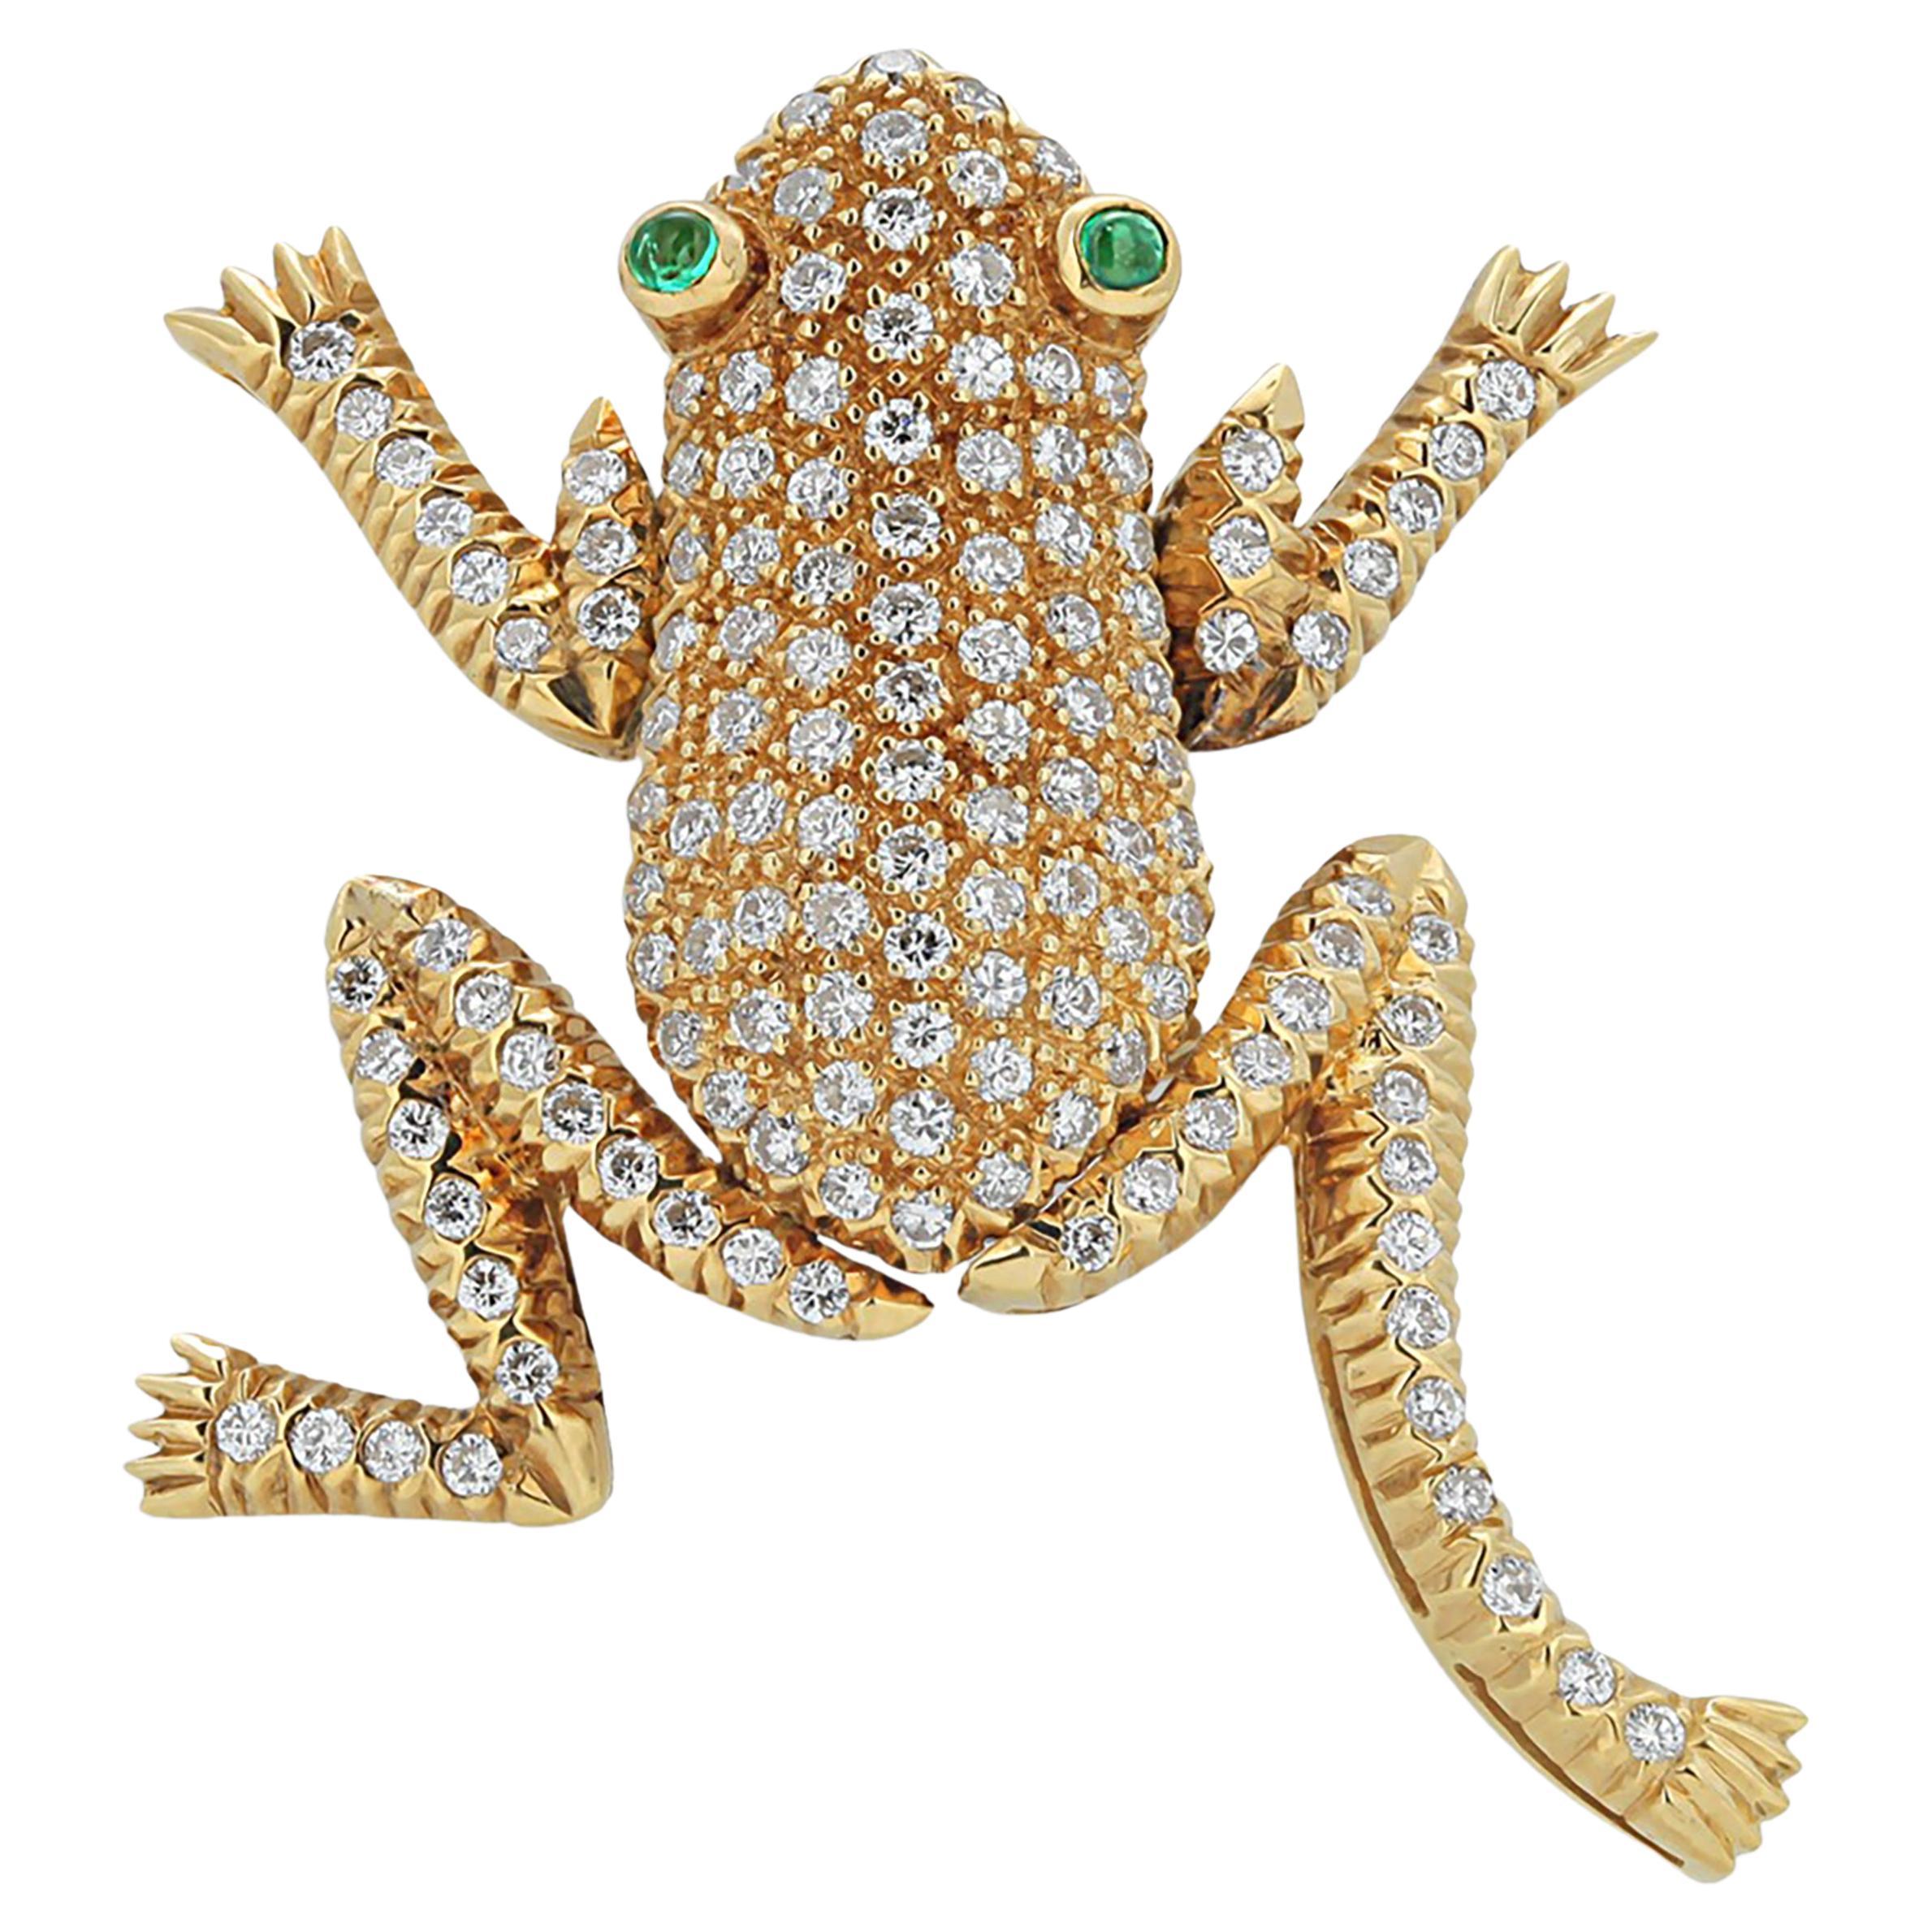 Eighteen Karat Gold Diamond Frog Brooch with En Tremblant Legs and Arms